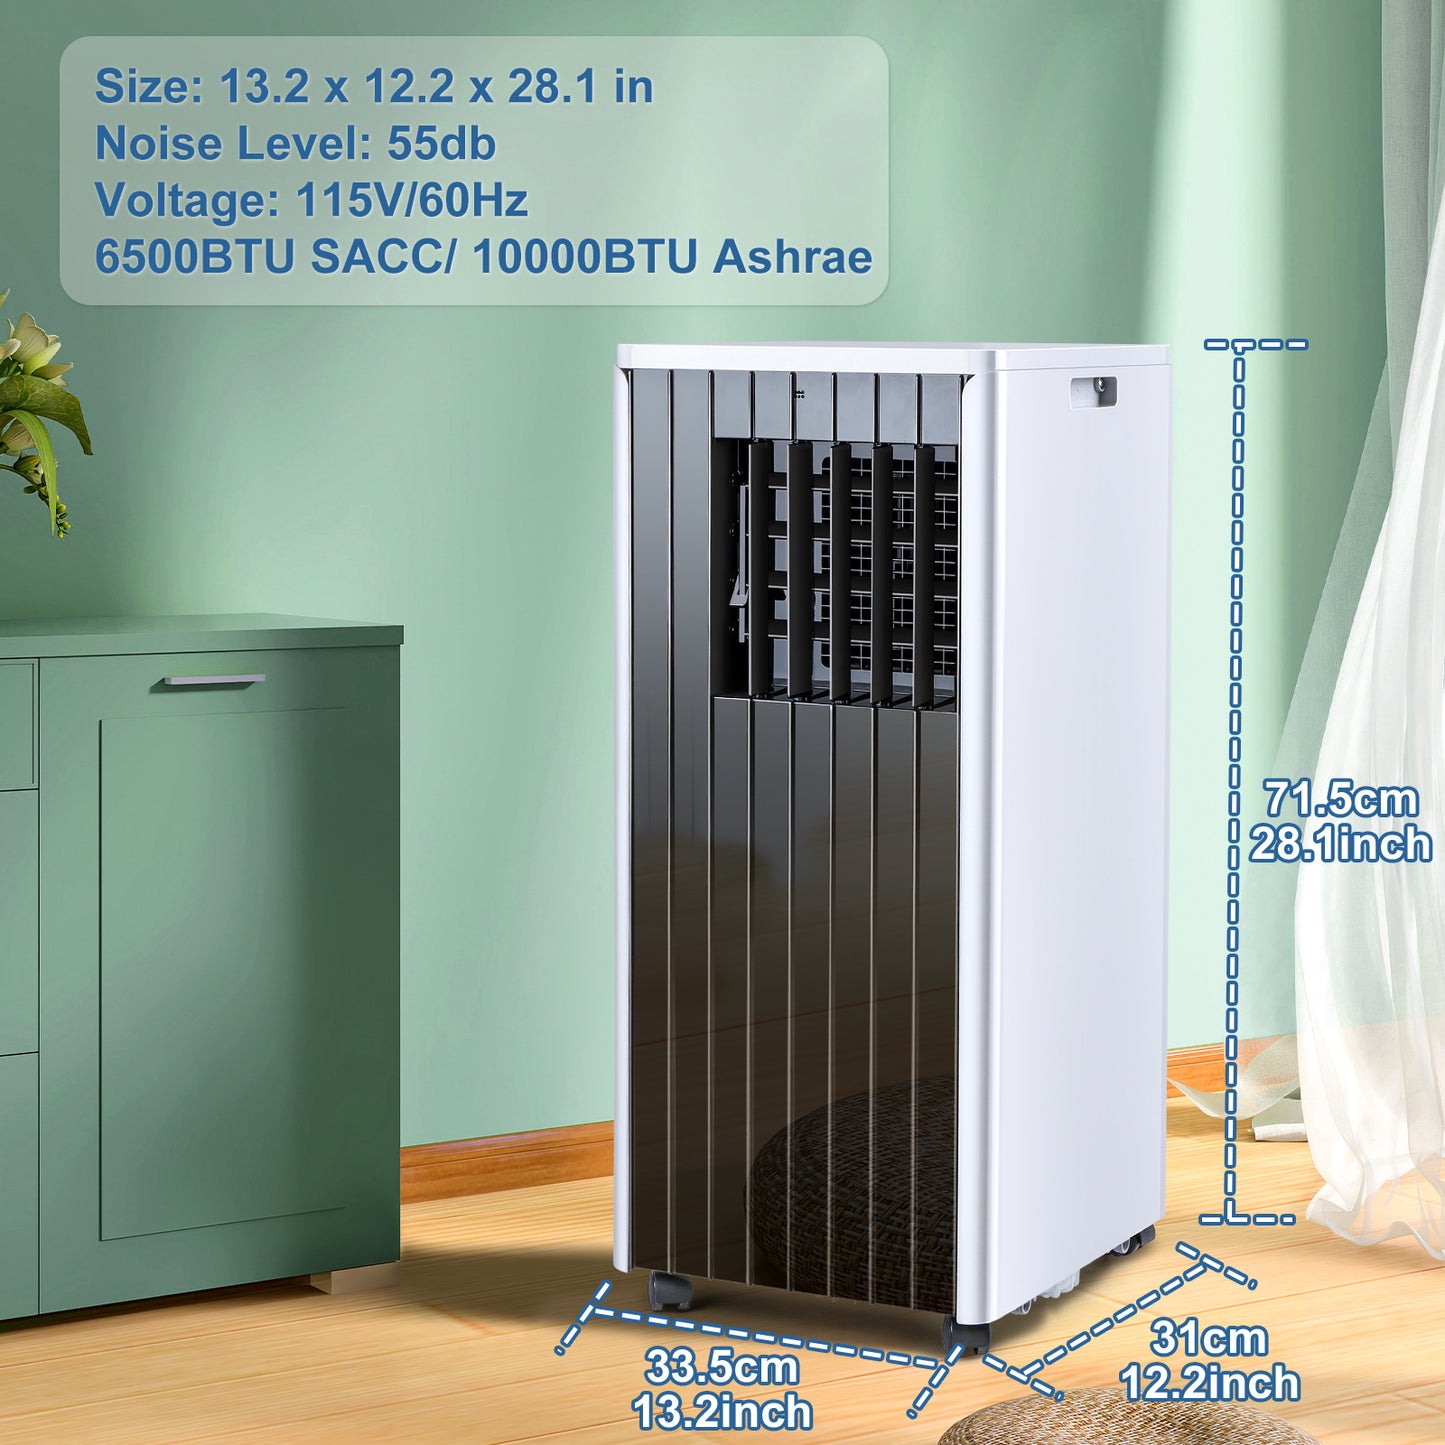 10,000 BTU Portable Air Conditioners, 5 in 1 Portable AC Unit For Room up to 250 Sq.Ft with Cool, Dehumidifier, Fan Mode, Sleep Mode, 24H Timer, Window Kit & Remote Control